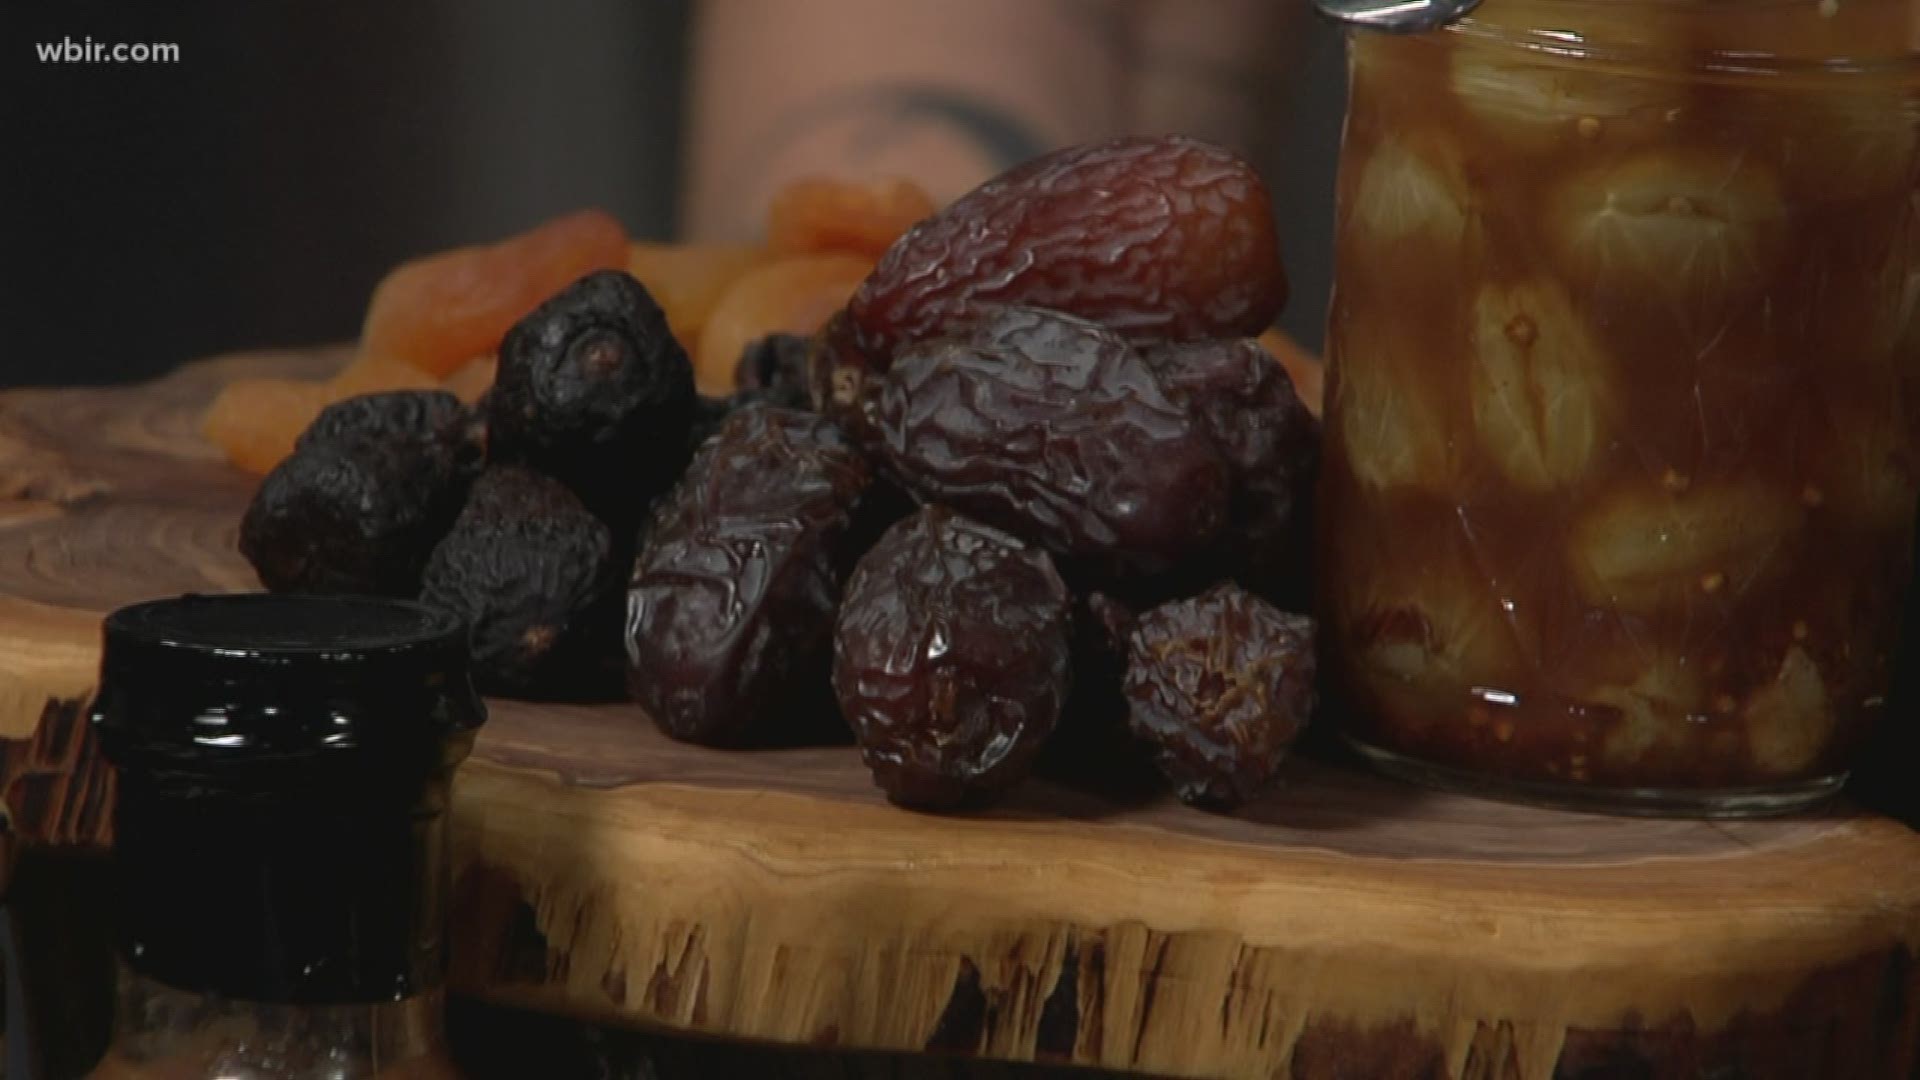 Century Harvest Farms shows us how to make pickled grapes as part of a charcuterie board.